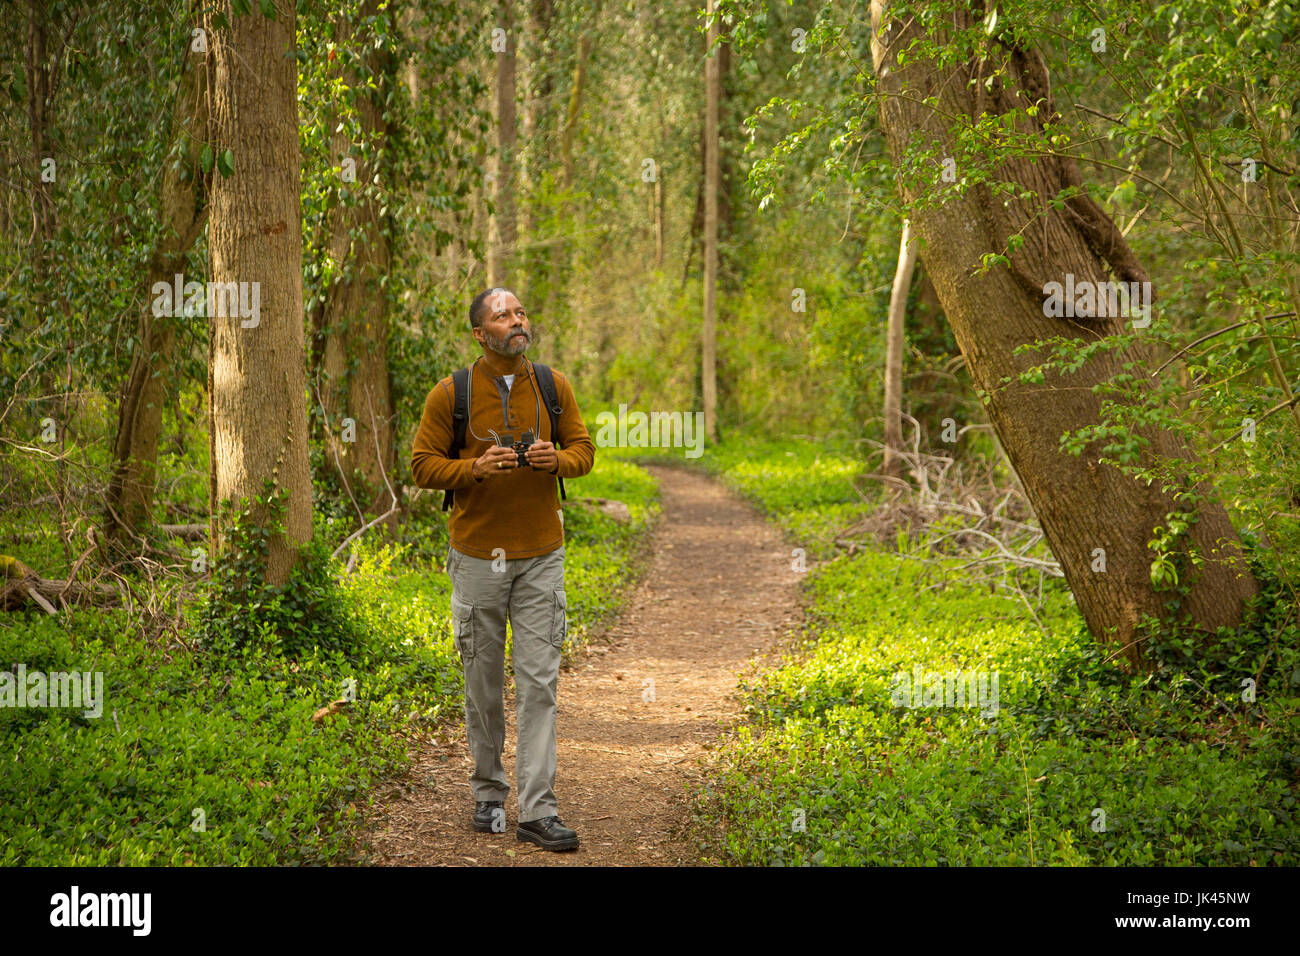 African American man walking on path in forest holding binoculars Stock Photo